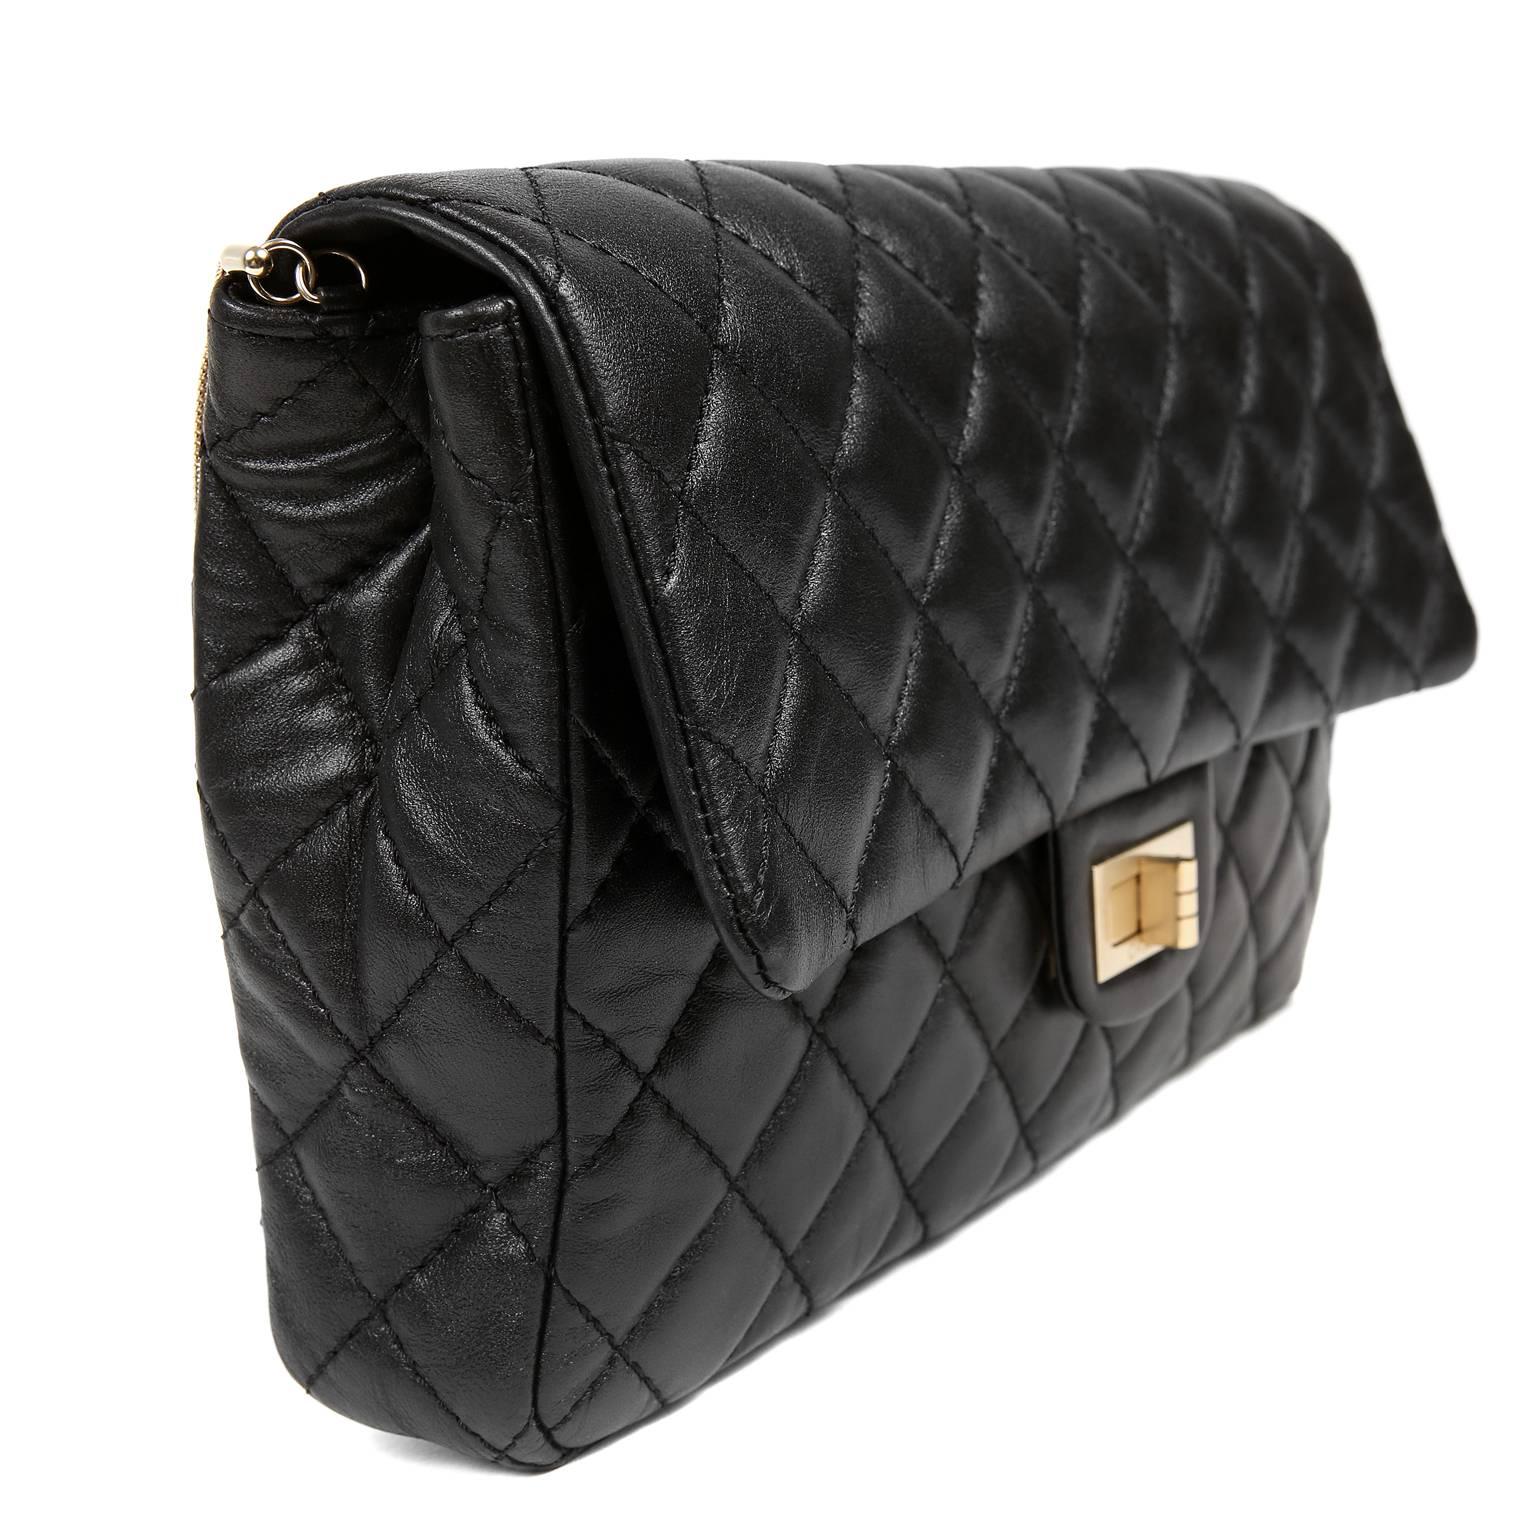 Chanel Black Quilted Leather Mademoiselle Flap Bag In Excellent Condition For Sale In Malibu, CA